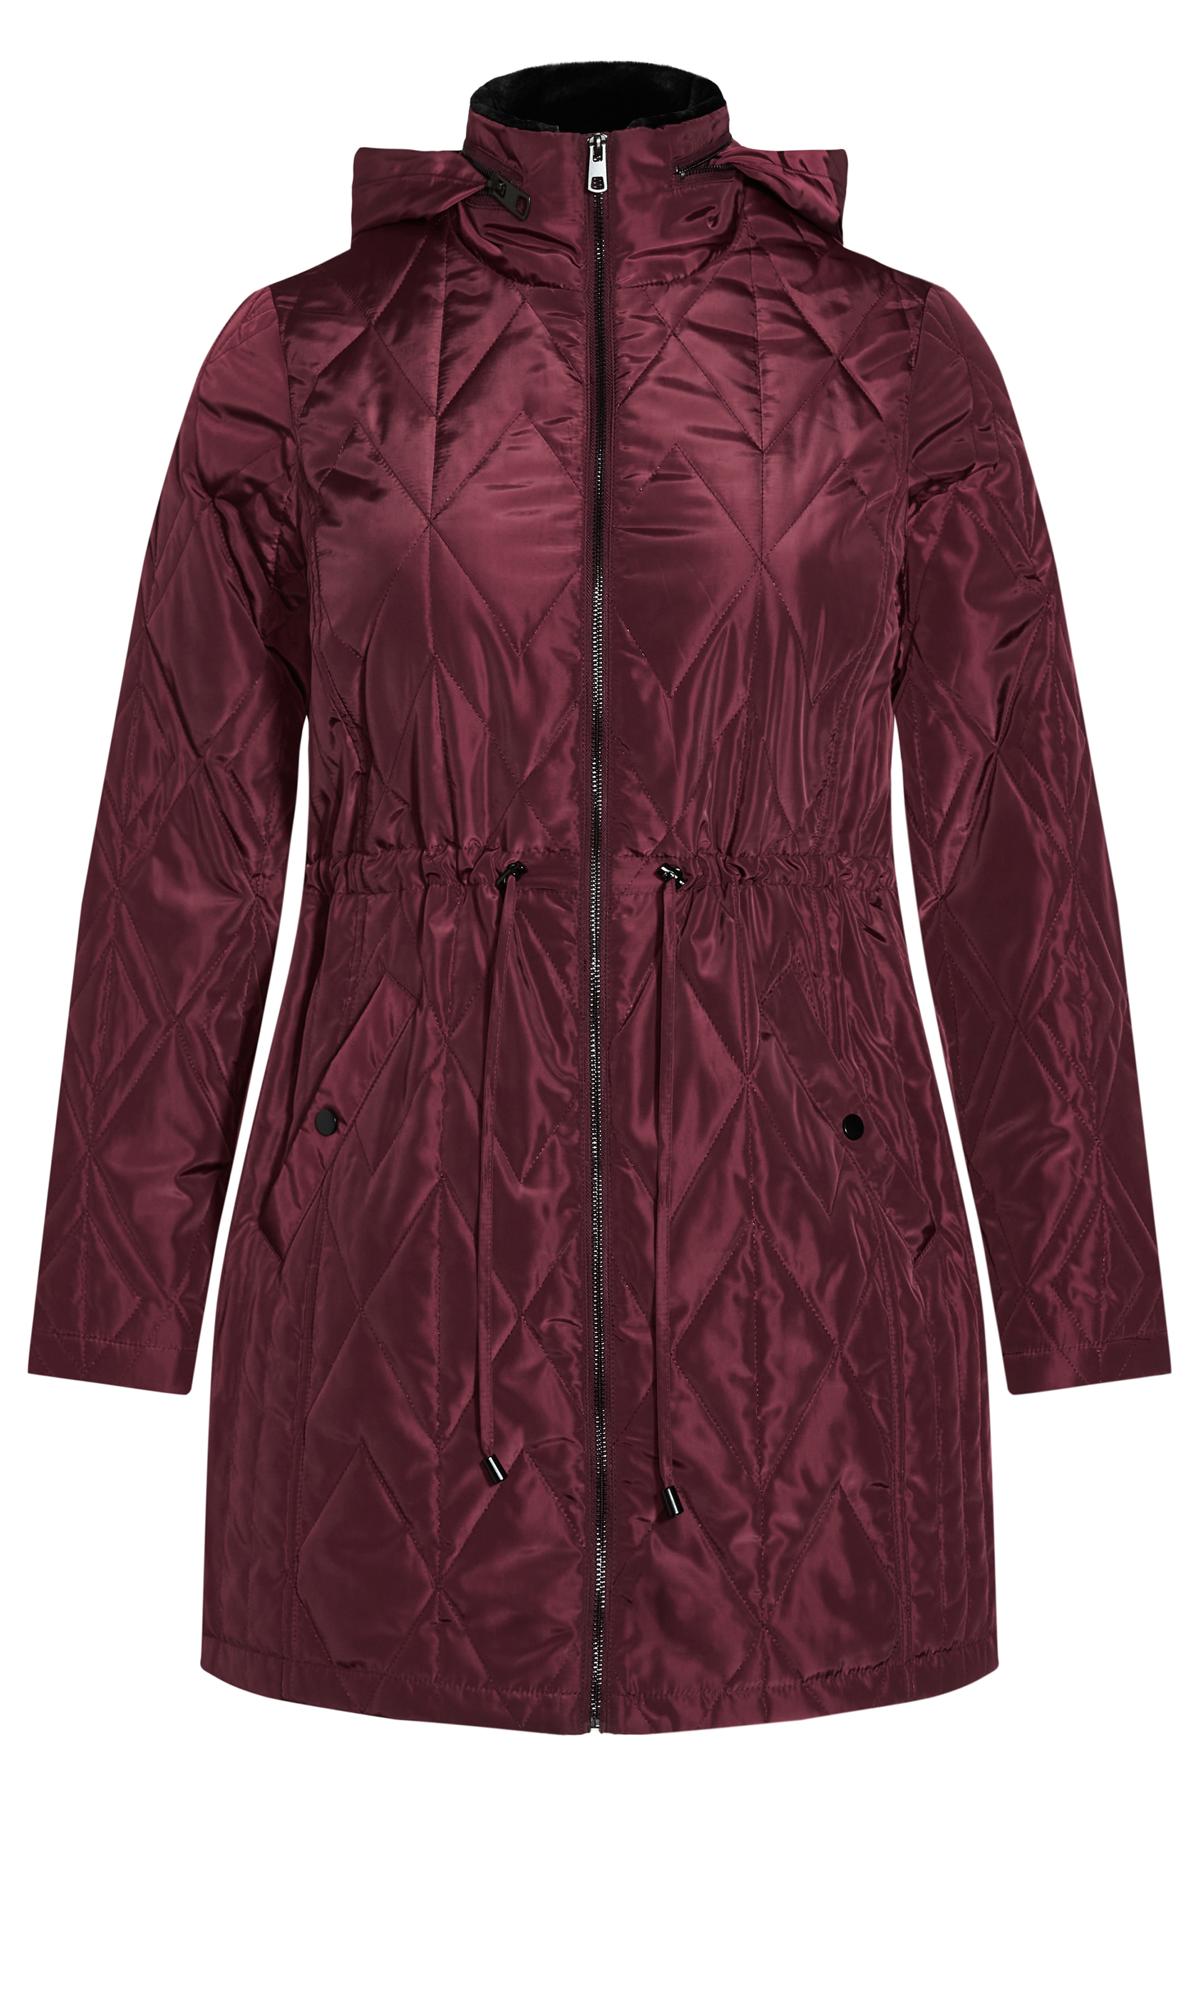 Evans Red Quilted Parka Coat 2